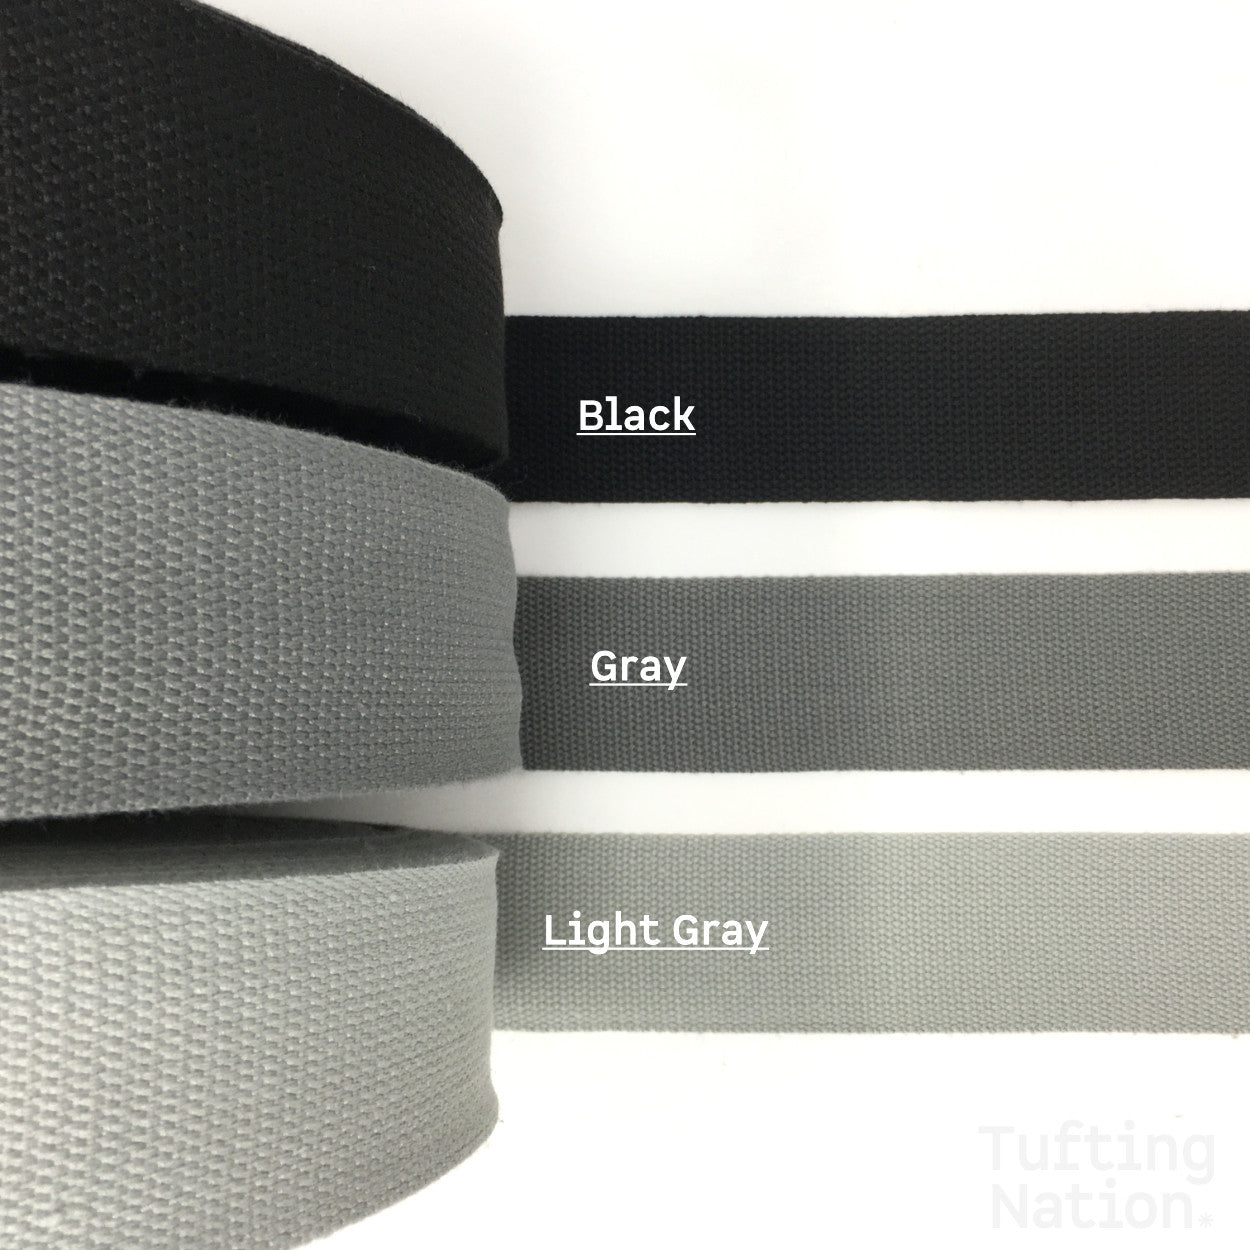 Rug Binding Tape, Carpet Binding Tape, 1.5 Inch Wide, 1 YARD Carpet Twill  Tape, Sturdy 100% Cotton Tape for Finishing Edges of Tufted Rugs 